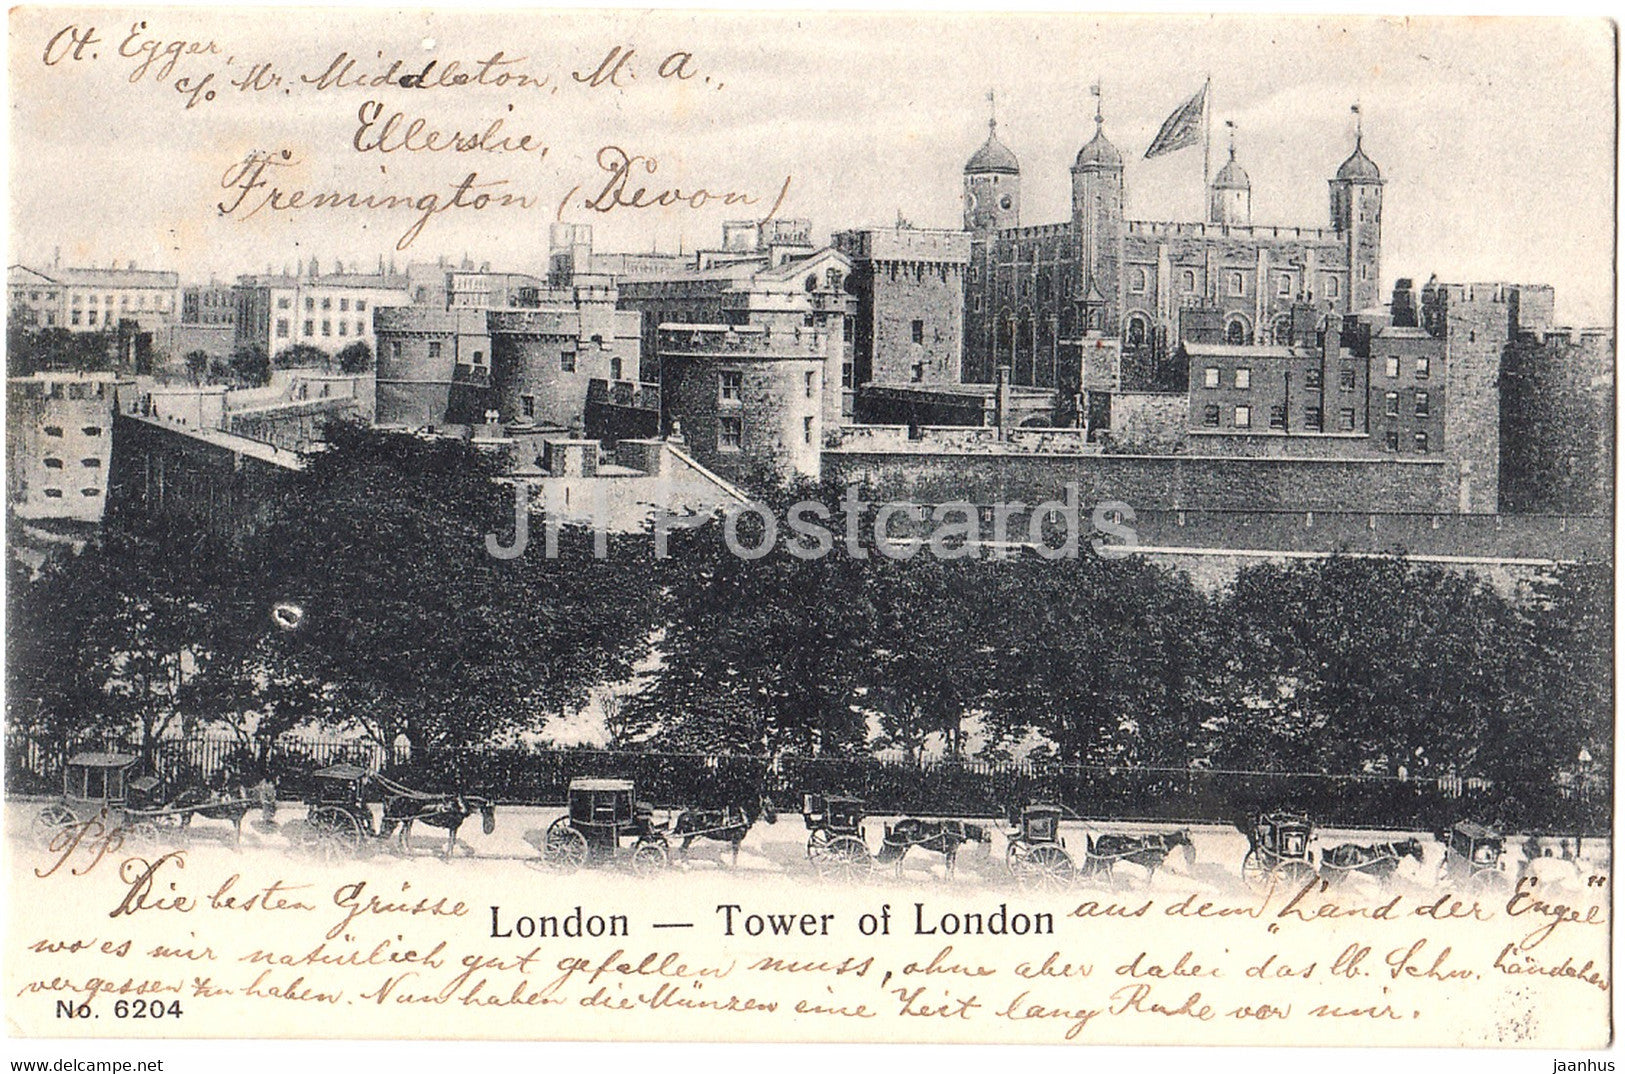 London - Tower of London - horse carriage - 6204 - old postcard - 1903 - England - United Kingdom - used - JH Postcards